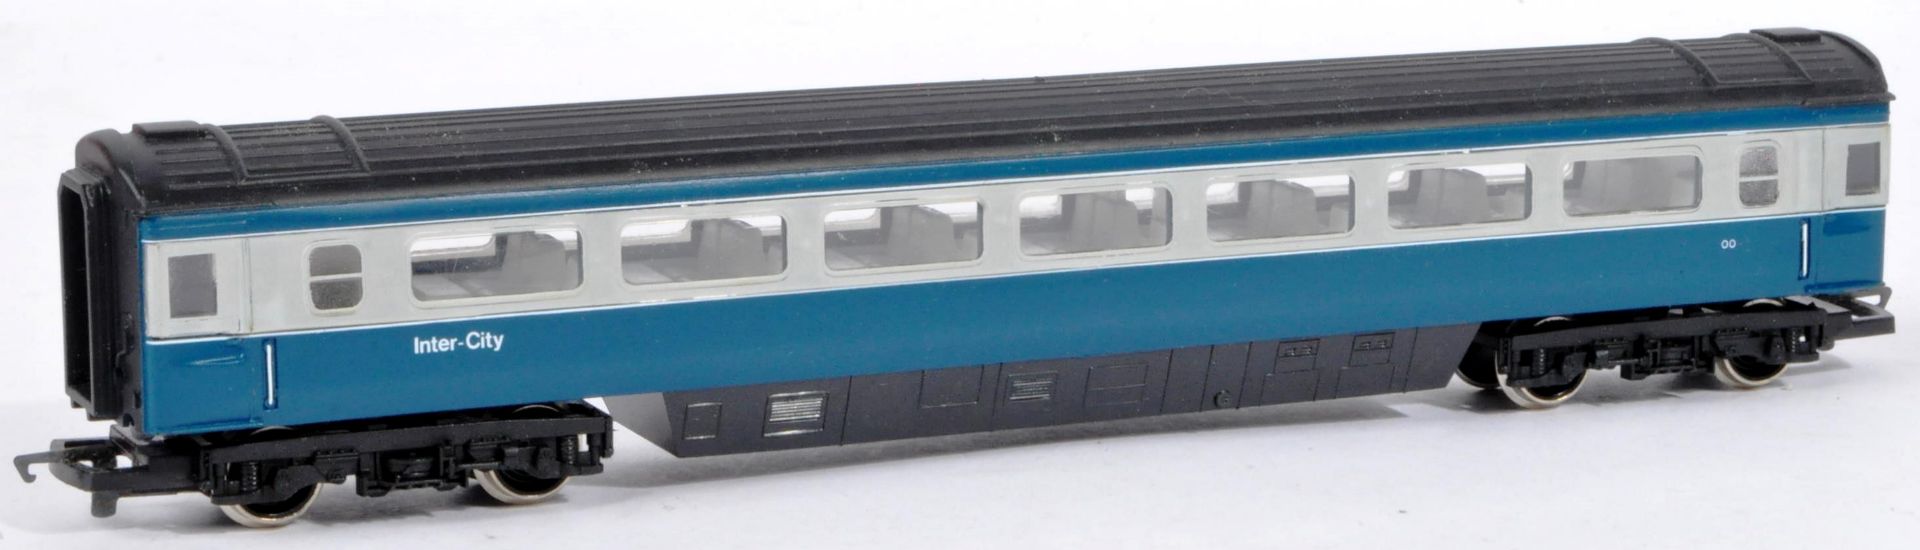 COLLECTION HORNBY 00 GAUGE MODEL RAILWAY DIESEL LOCOS & CARRIAGES - Image 8 of 9